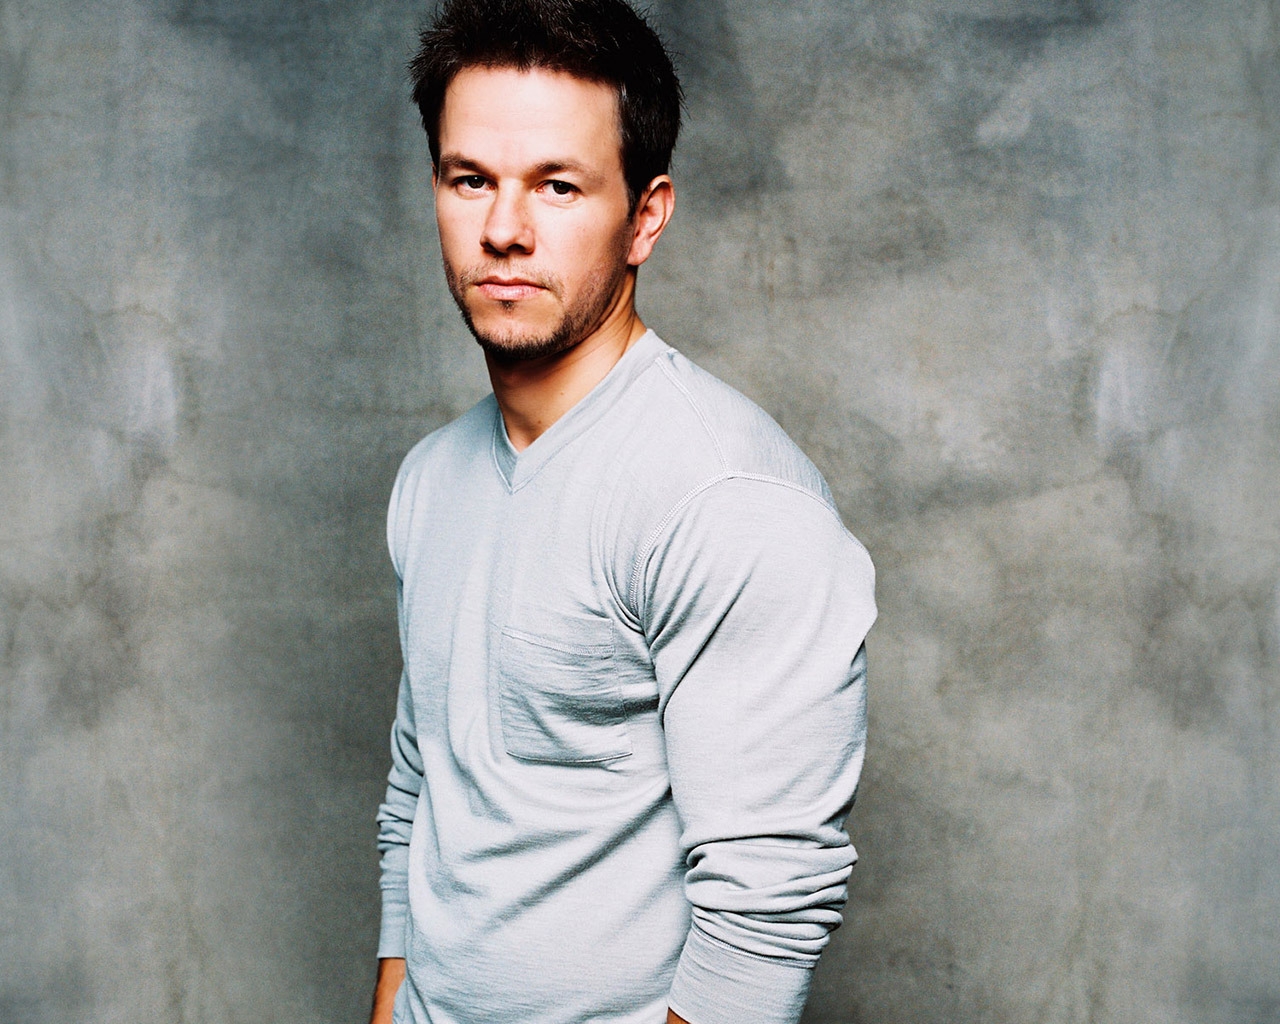 Mark Wahlberg Look for 1280 x 1024 resolution